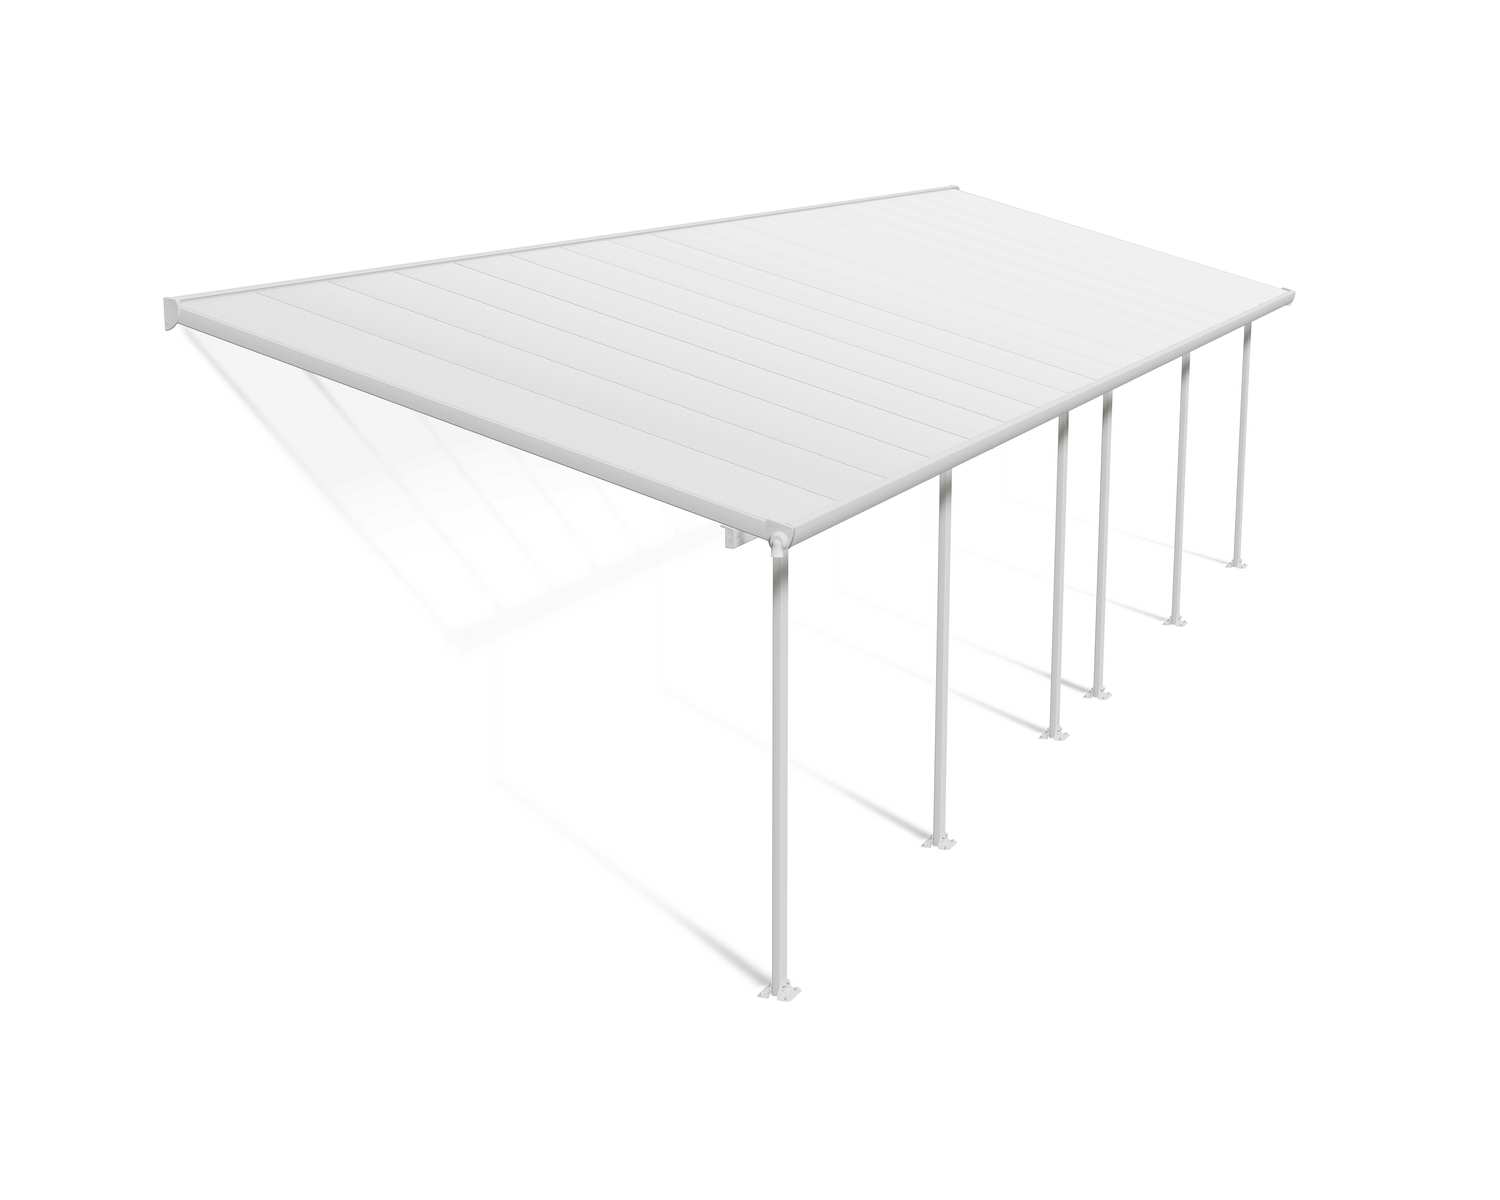 Feria 10 ft. x 32 ft. White Aluminium Patio Cover With 6 Posts, White Twin-Wall Polycarbonate Roof Panels.